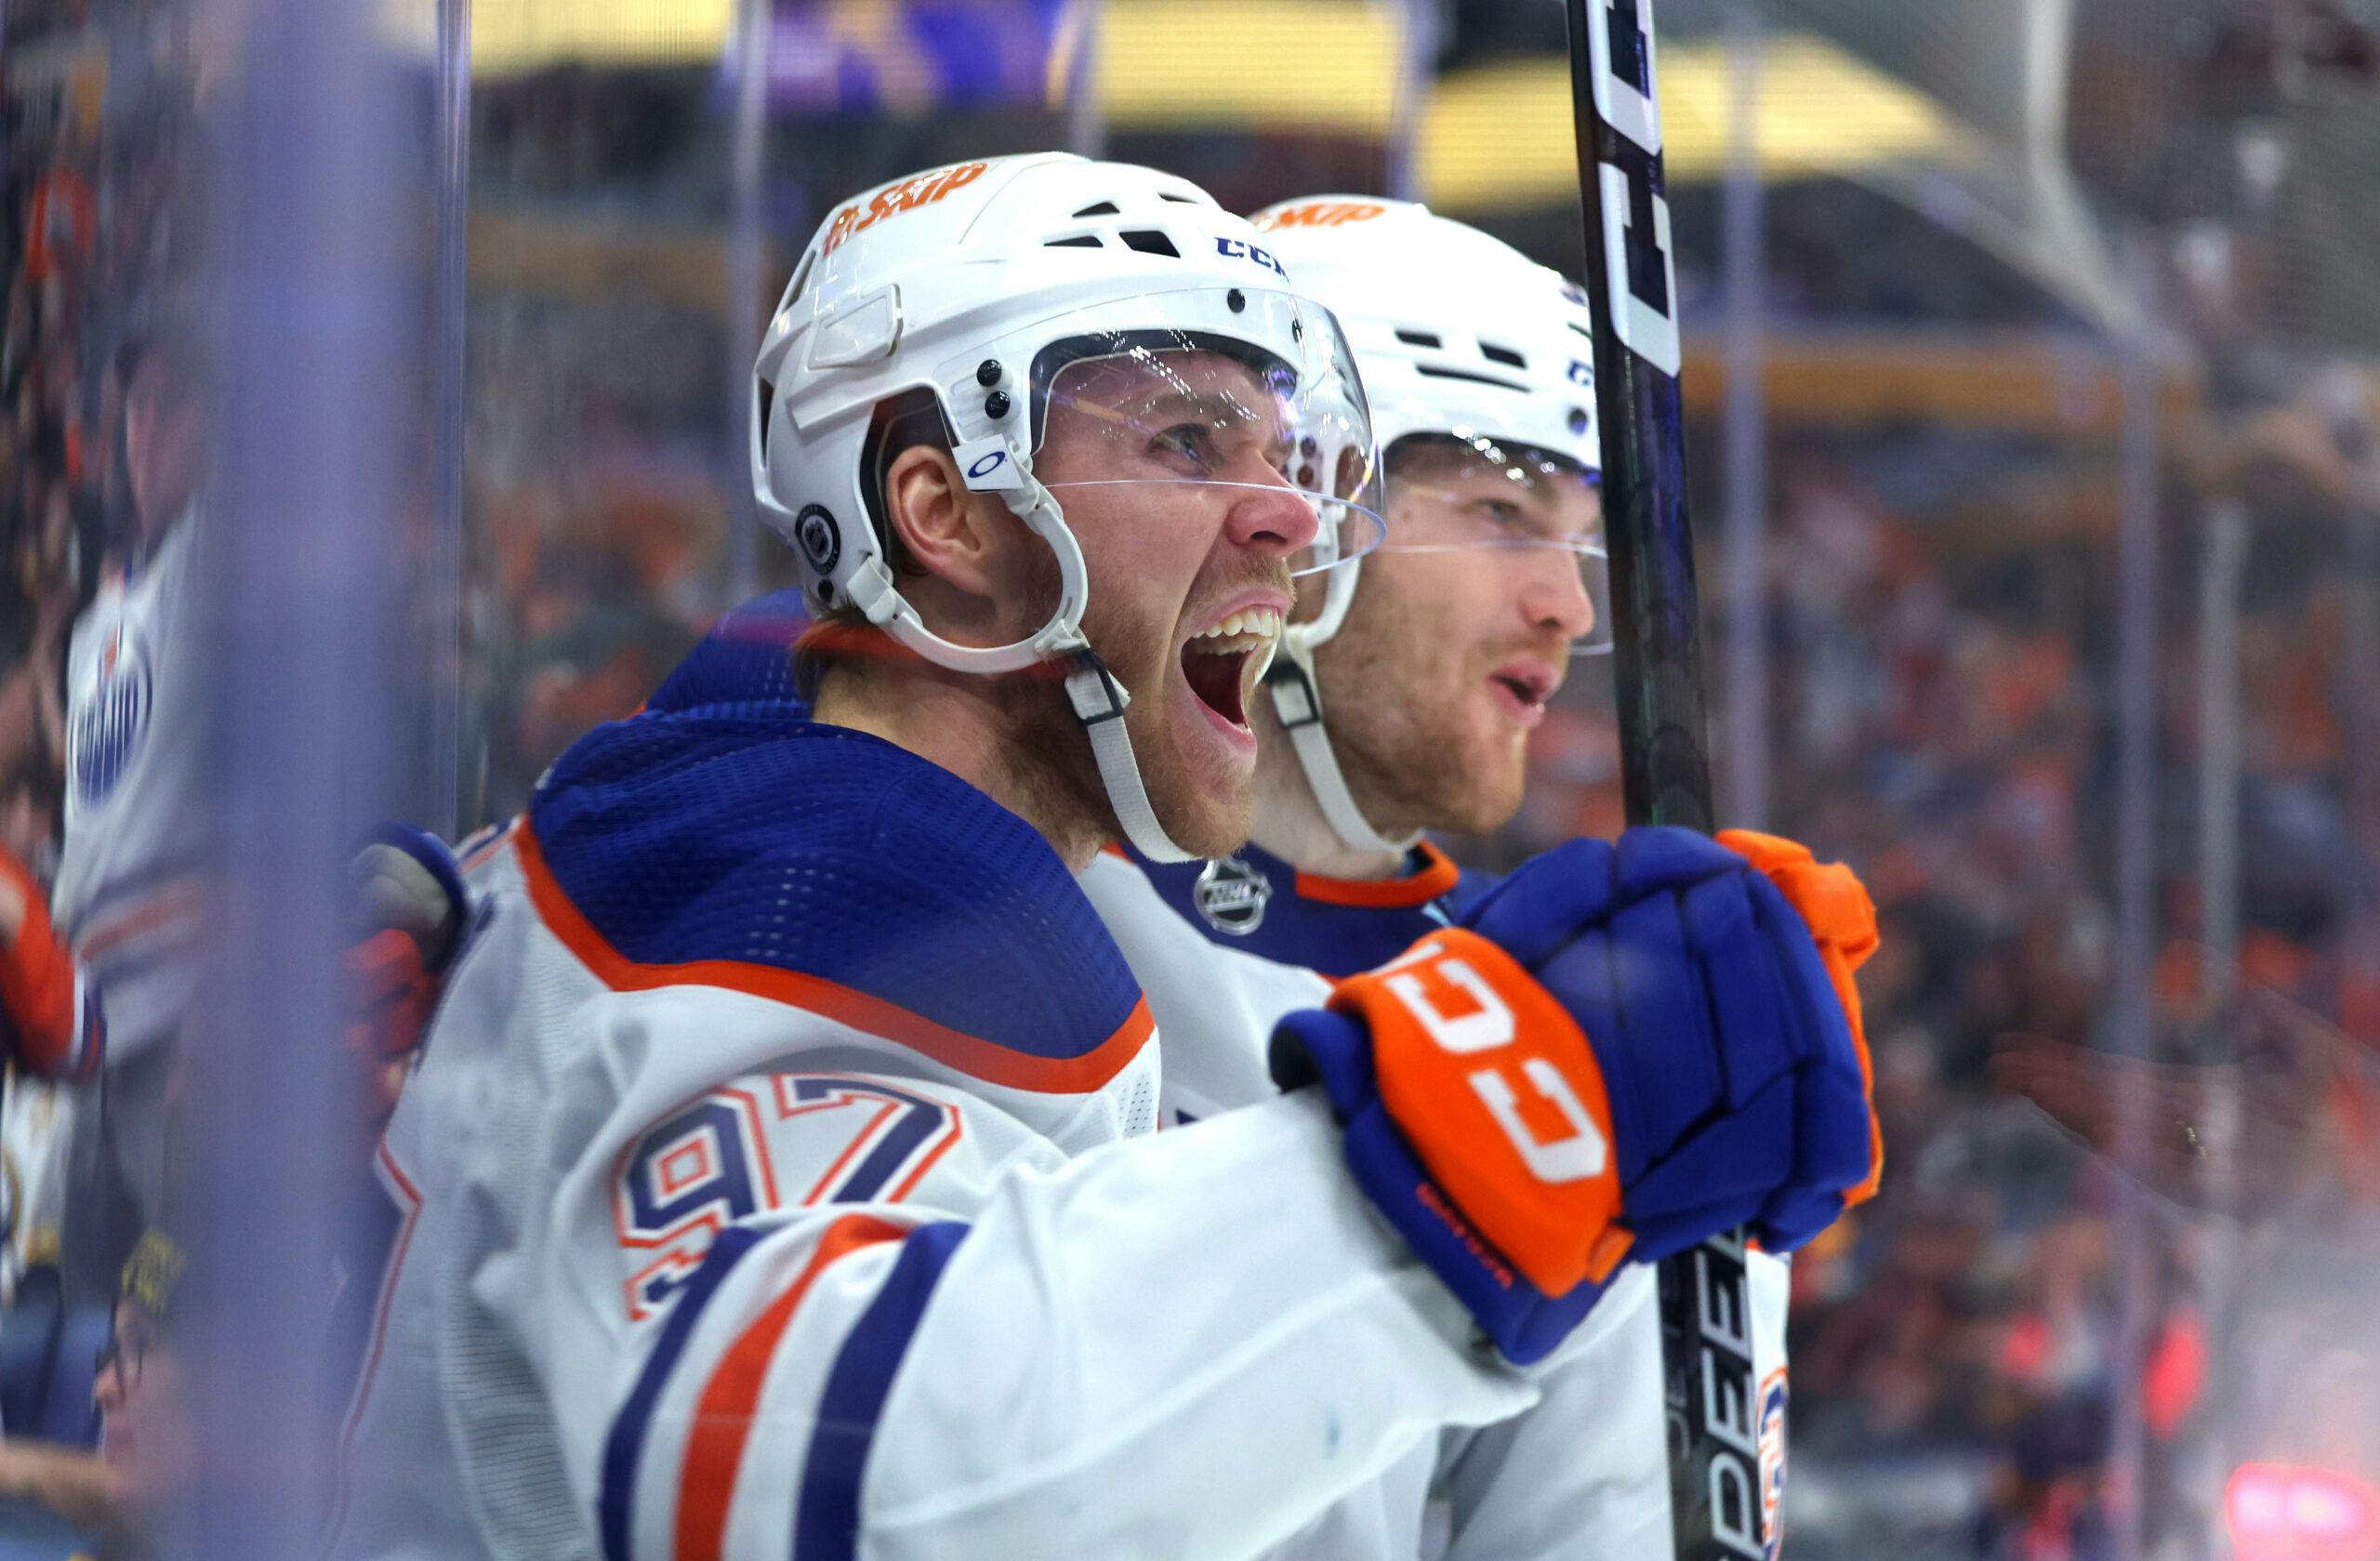 Connor McDavid could break Wayne Gretzky's playoff-points record